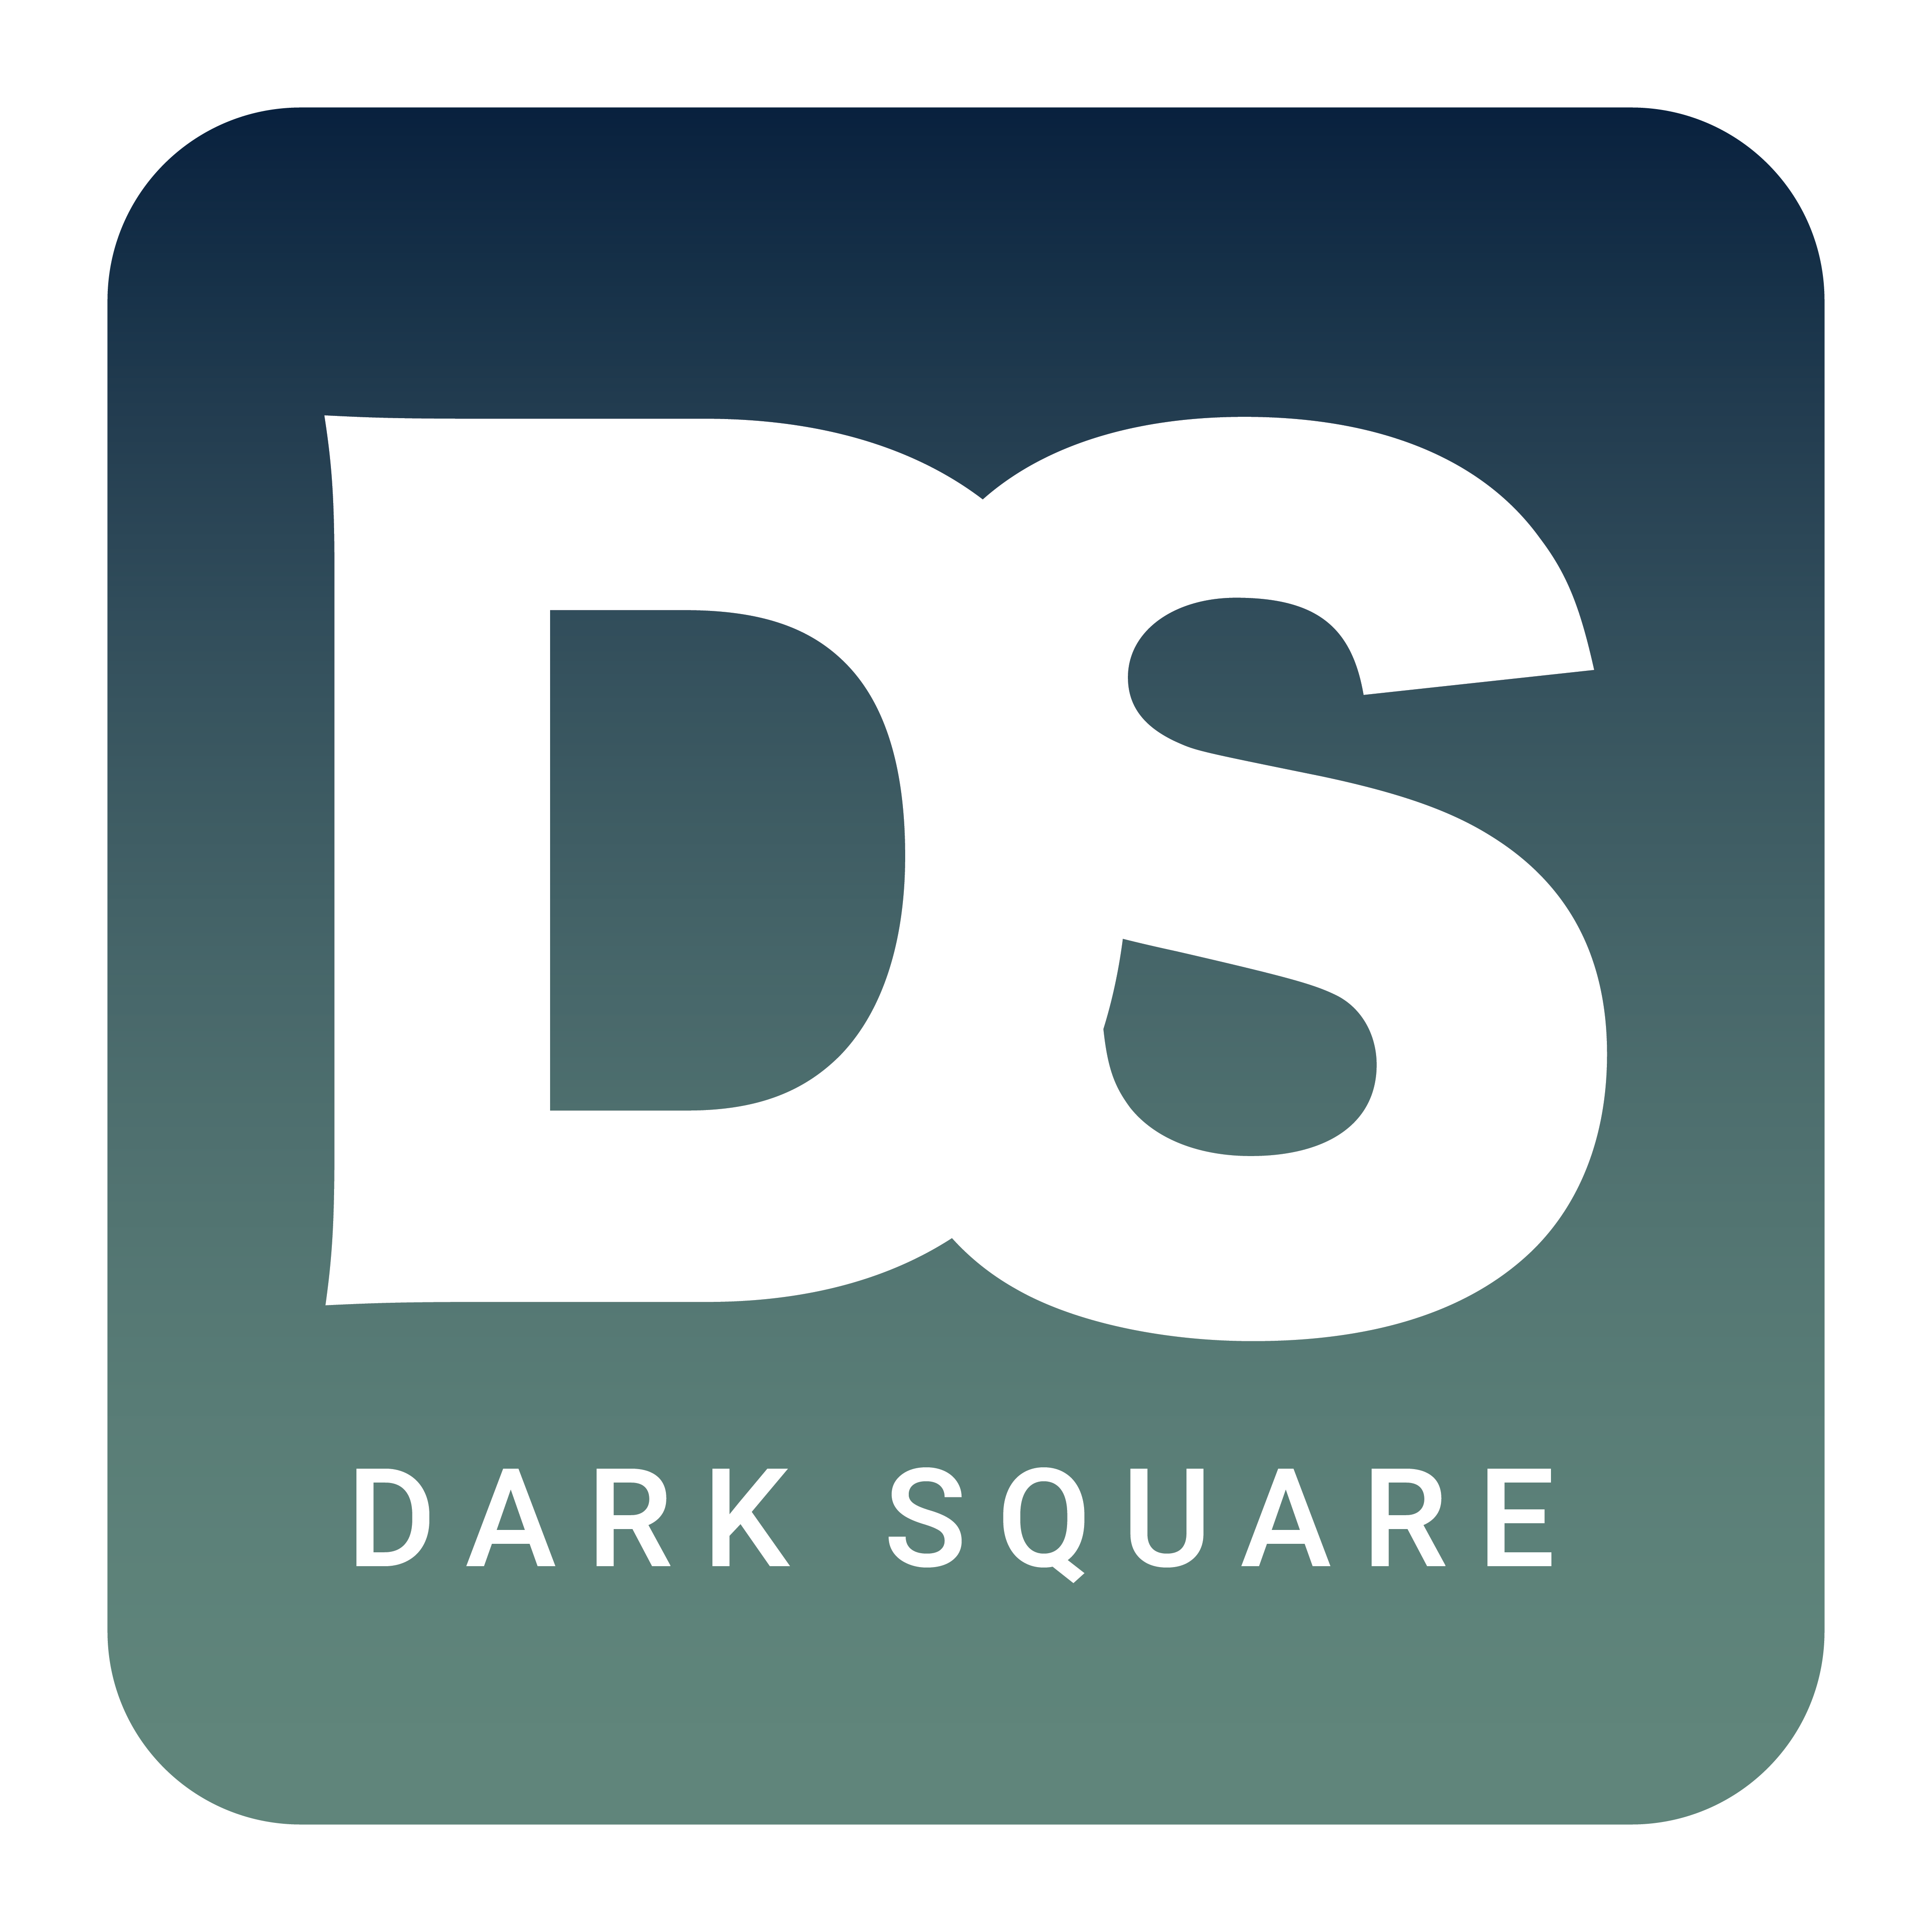 Dark Square Advertising and Marketing Agency